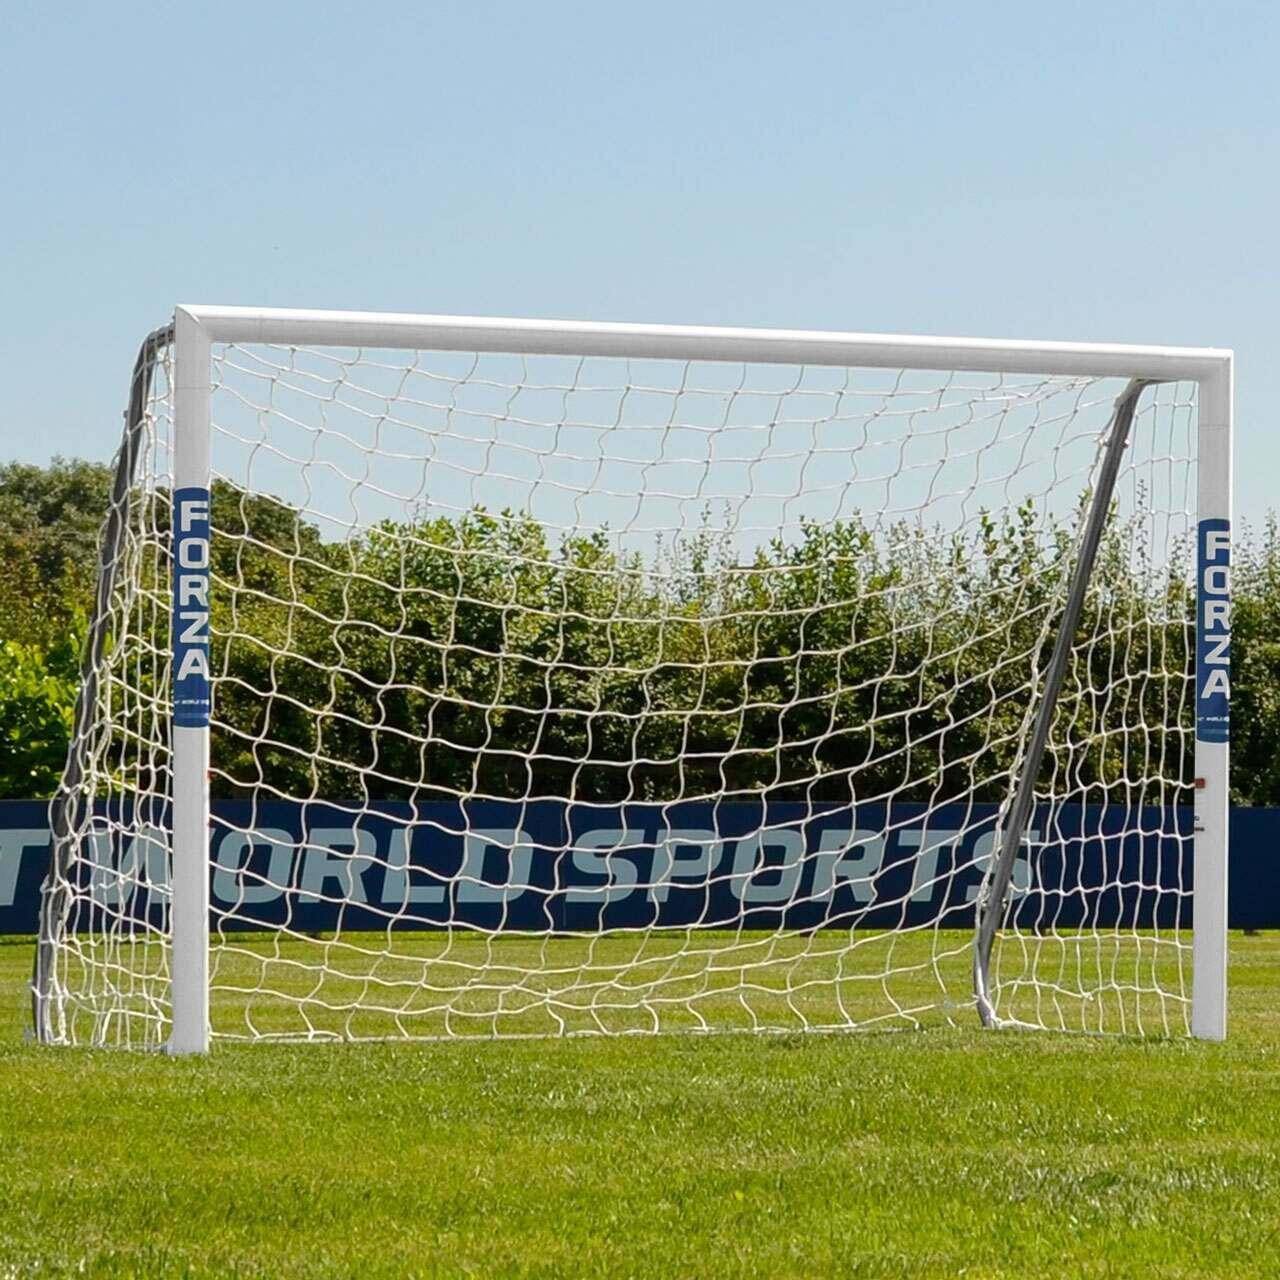 The Ultimate 6 x 4 Aluminum Soccer Goal for Young Footballers